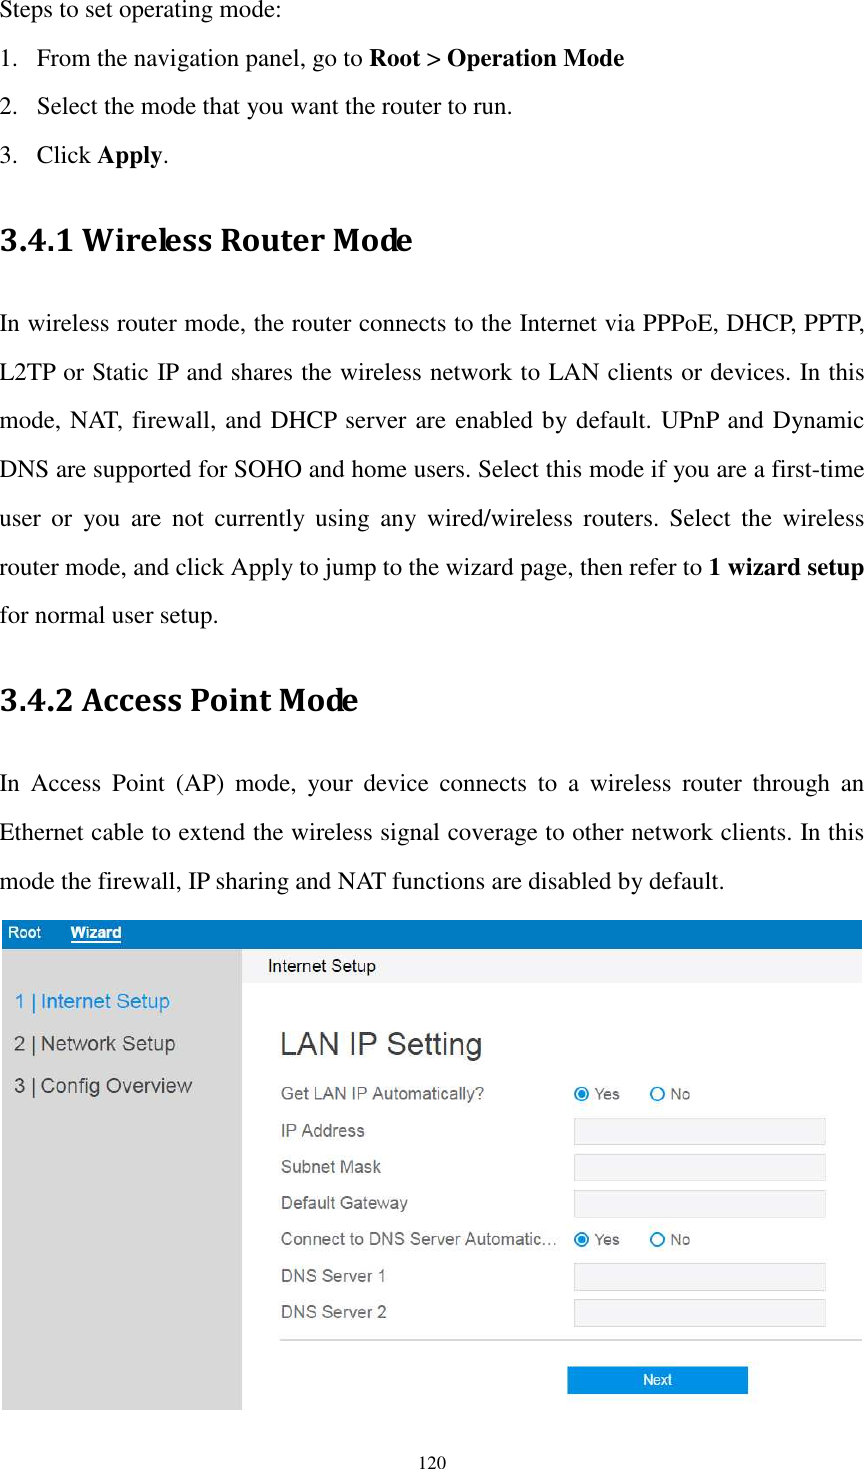  120 Steps to set operating mode: 1. From the navigation panel, go to Root &gt; Operation Mode 2. Select the mode that you want the router to run. 3. Click Apply. 3.4.1 Wireless Router Mode In wireless router mode, the router connects to the Internet via PPPoE, DHCP, PPTP, L2TP or Static IP and shares the wireless network to LAN clients or devices. In this mode, NAT, firewall, and DHCP server are enabled by default. UPnP and Dynamic DNS are supported for SOHO and home users. Select this mode if you are a first-time user  or  you  are  not  currently  using  any  wired/wireless  routers.  Select  the  wireless router mode, and click Apply to jump to the wizard page, then refer to 1 wizard setup for normal user setup. 3.4.2 Access Point Mode In  Access  Point  (AP)  mode,  your  device  connects  to  a  wireless  router  through  an Ethernet cable to extend the wireless signal coverage to other network clients. In this mode the firewall, IP sharing and NAT functions are disabled by default.  